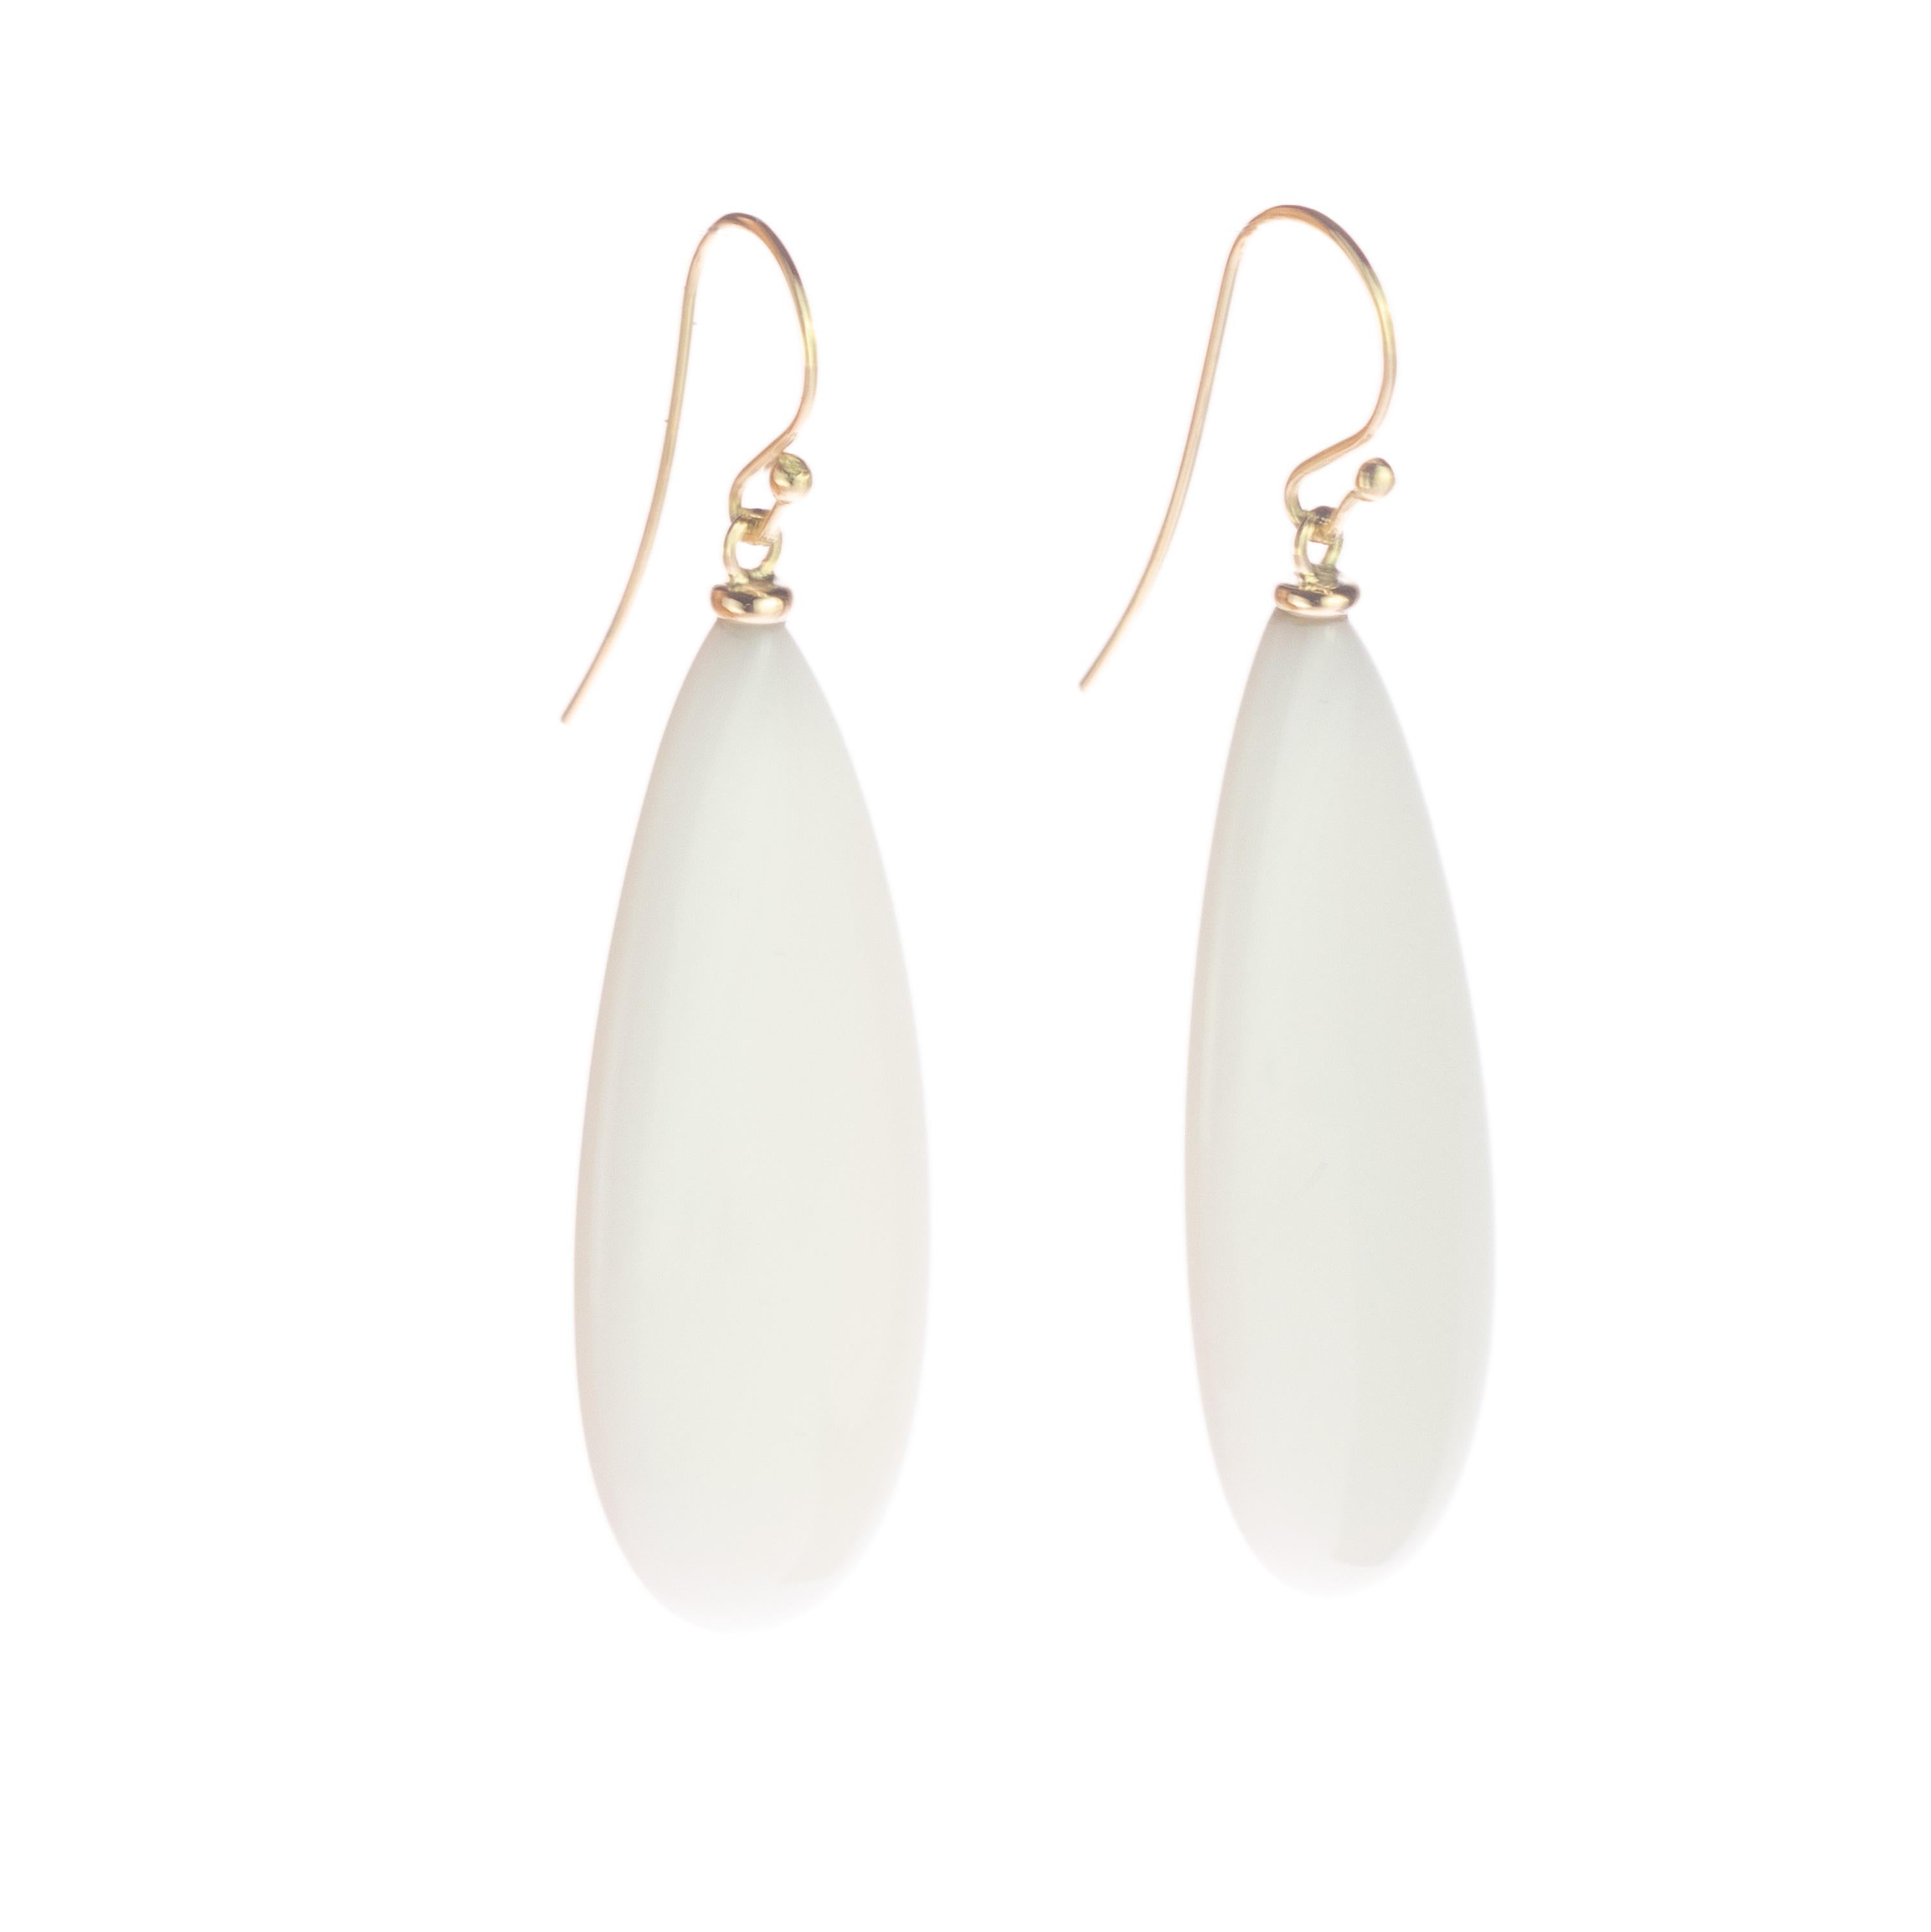 This stunning masterpiece with high quality craftsmanship was born in the Intini Jewels workshop. Our designers add all the italian modern style and glamour in one exquisite piece. Stunning white Agate sharp and flat teardrop, hanging from 18 karat